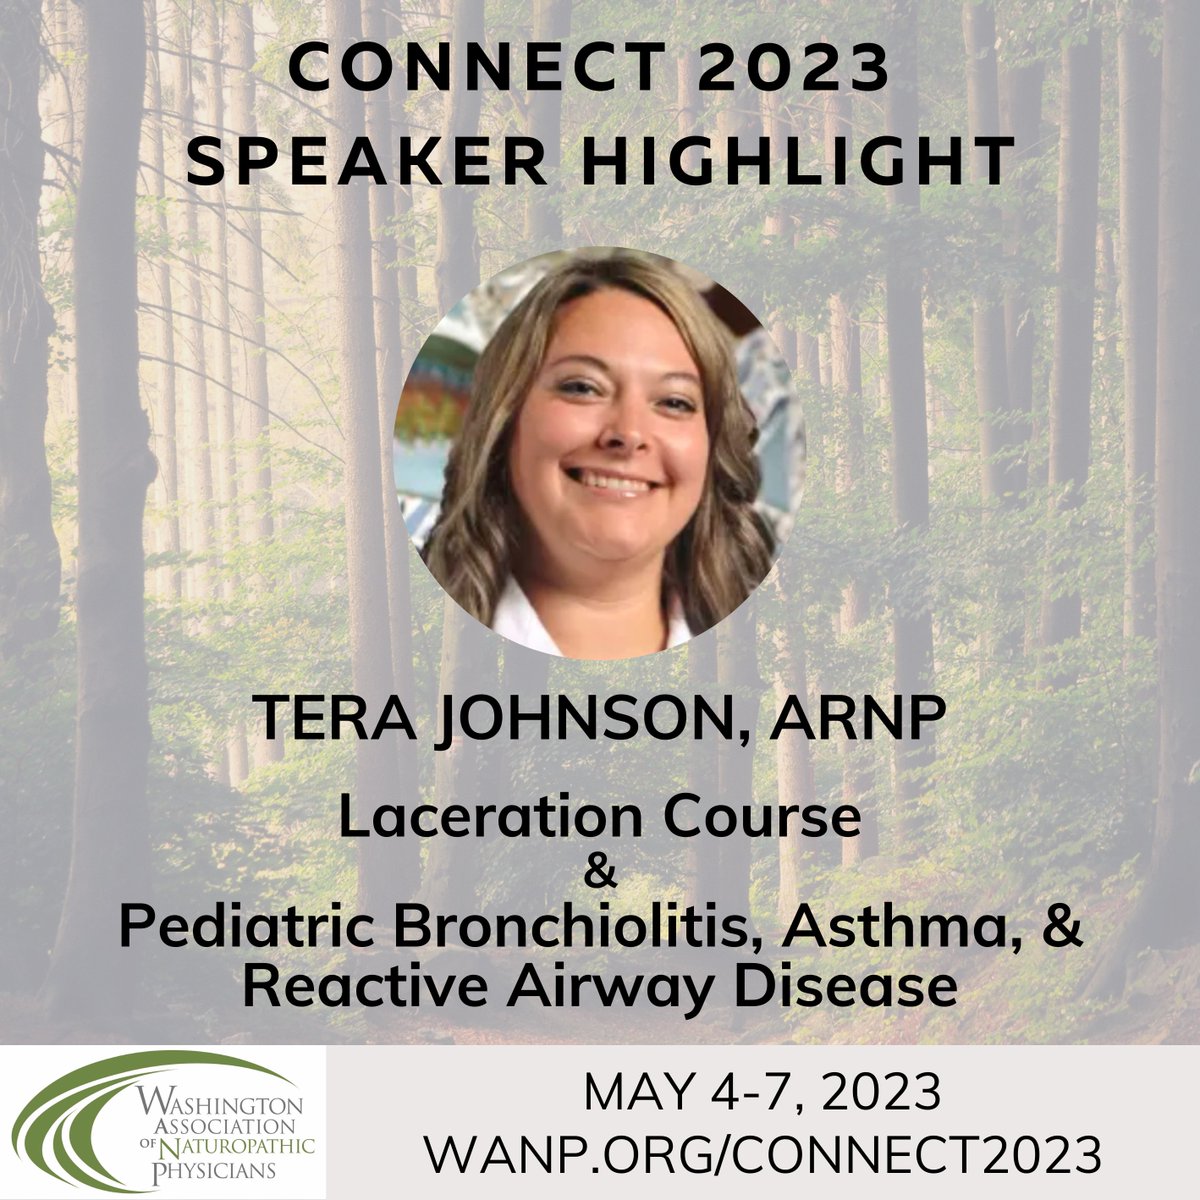 ~ CONNECT 2023 Speaker Highlight: Tera Johnson, ARNP ~
*Laceration Course*
&
*Pediatric Bronchiolitis, Asthma, & Reactive Airway Disease*

wanp.org/connect2023

#speakerhighlight #connect2023 #wanpevents #continuingeducation #inpersonclasses #laceration #PediatricMedicine